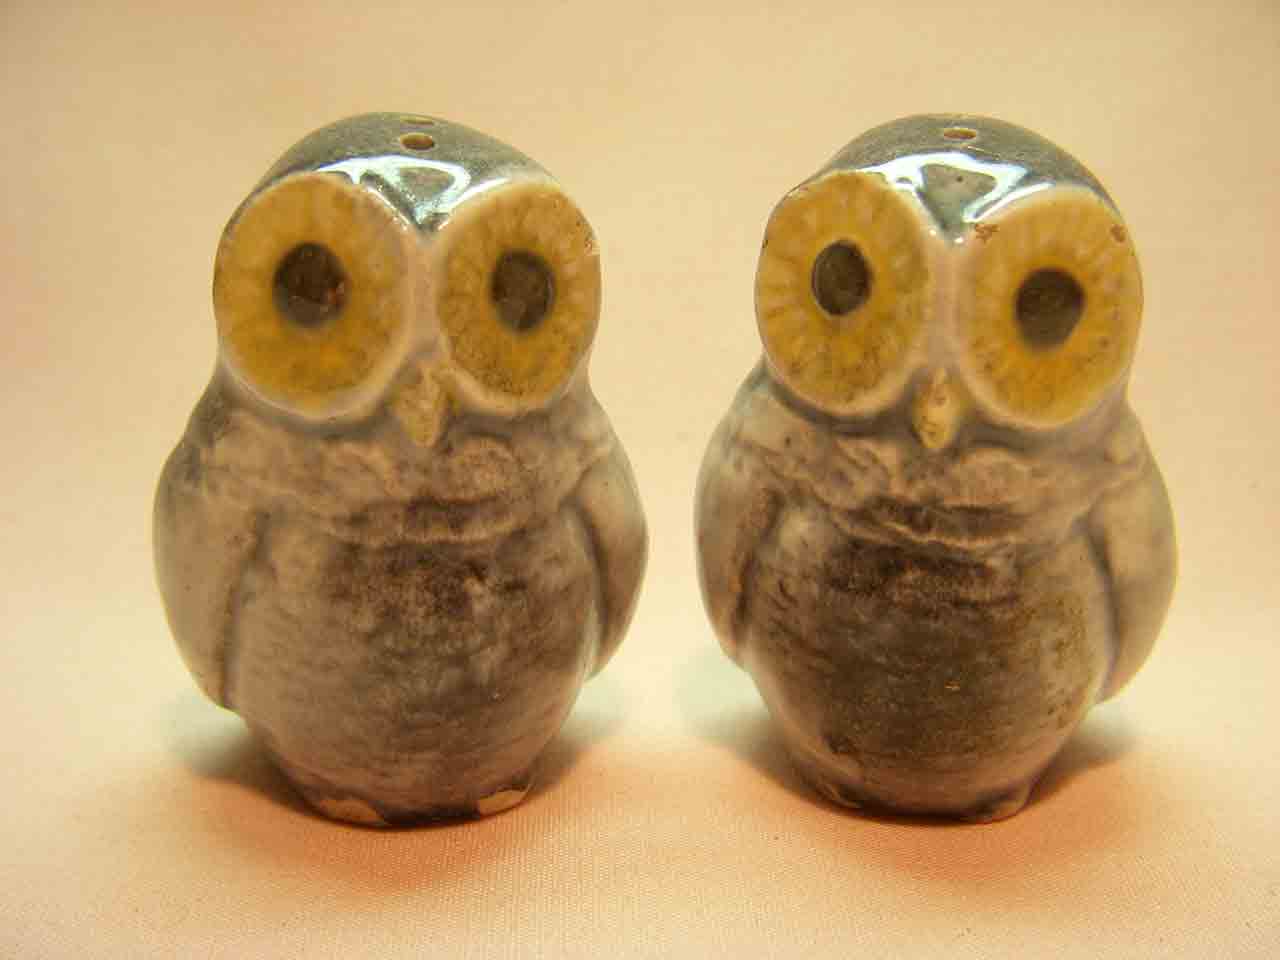 Vallona Starr owls salt and pepper shakers